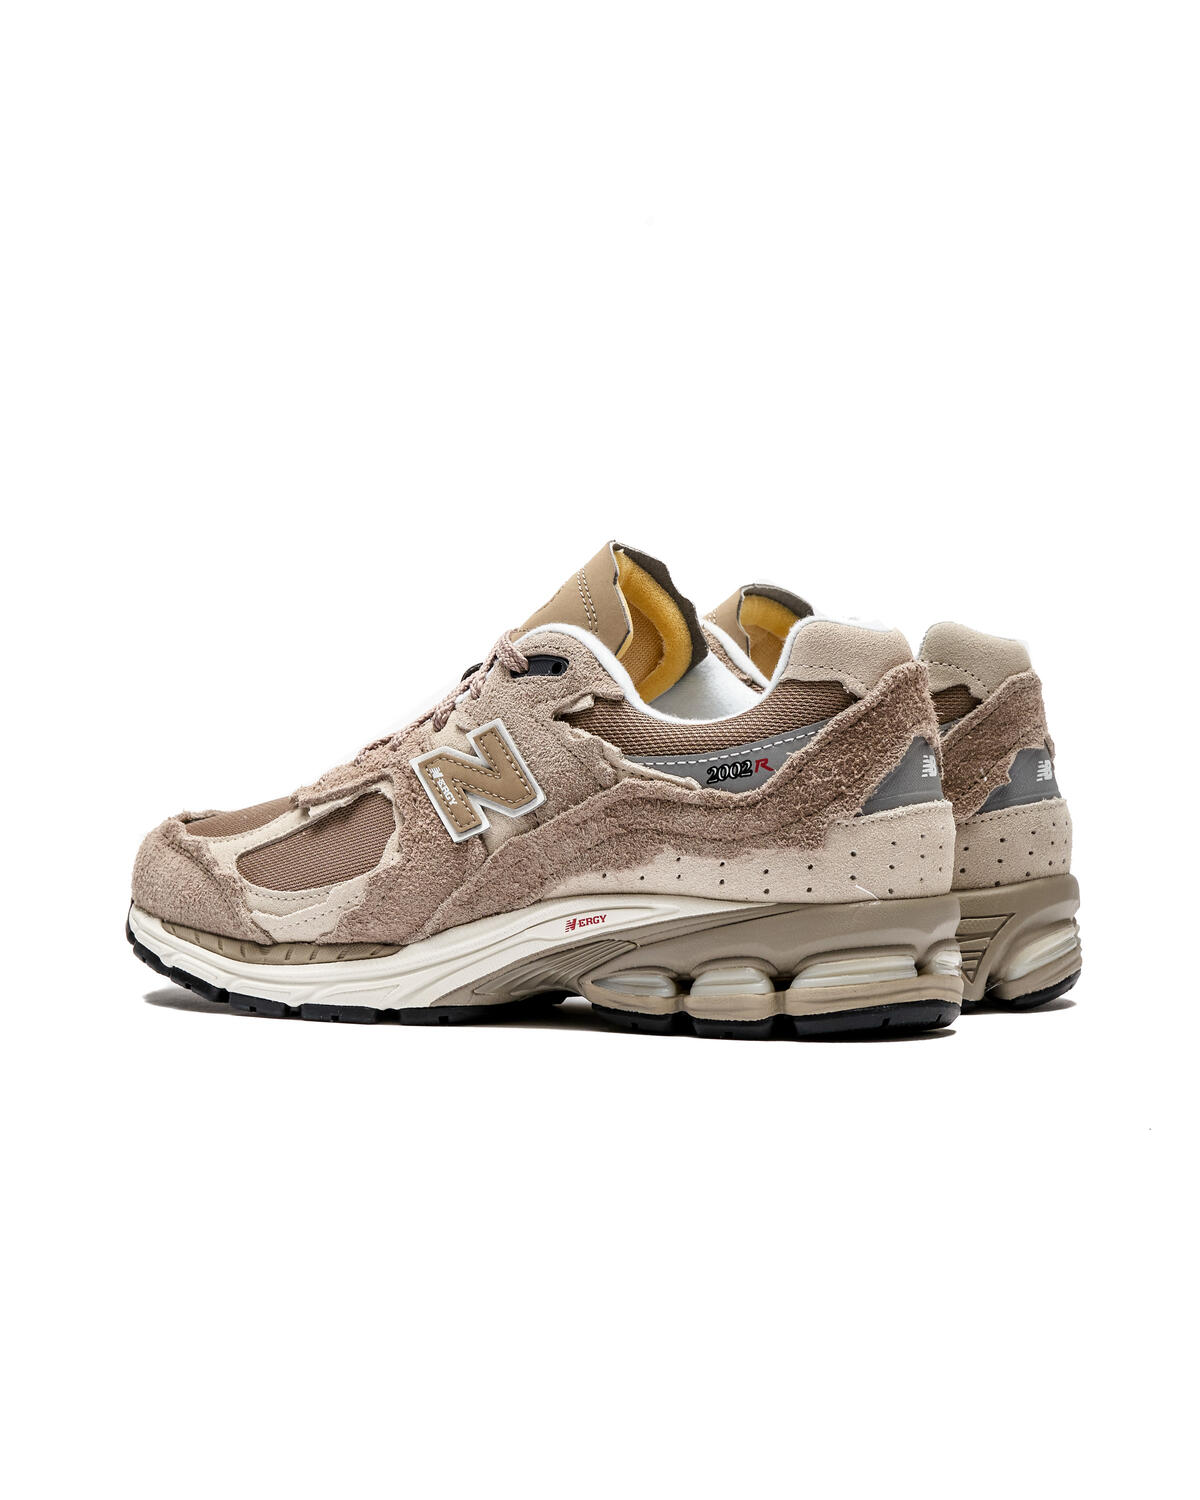 New Balance - 2002r Driftwood with timber wolf and sea salt